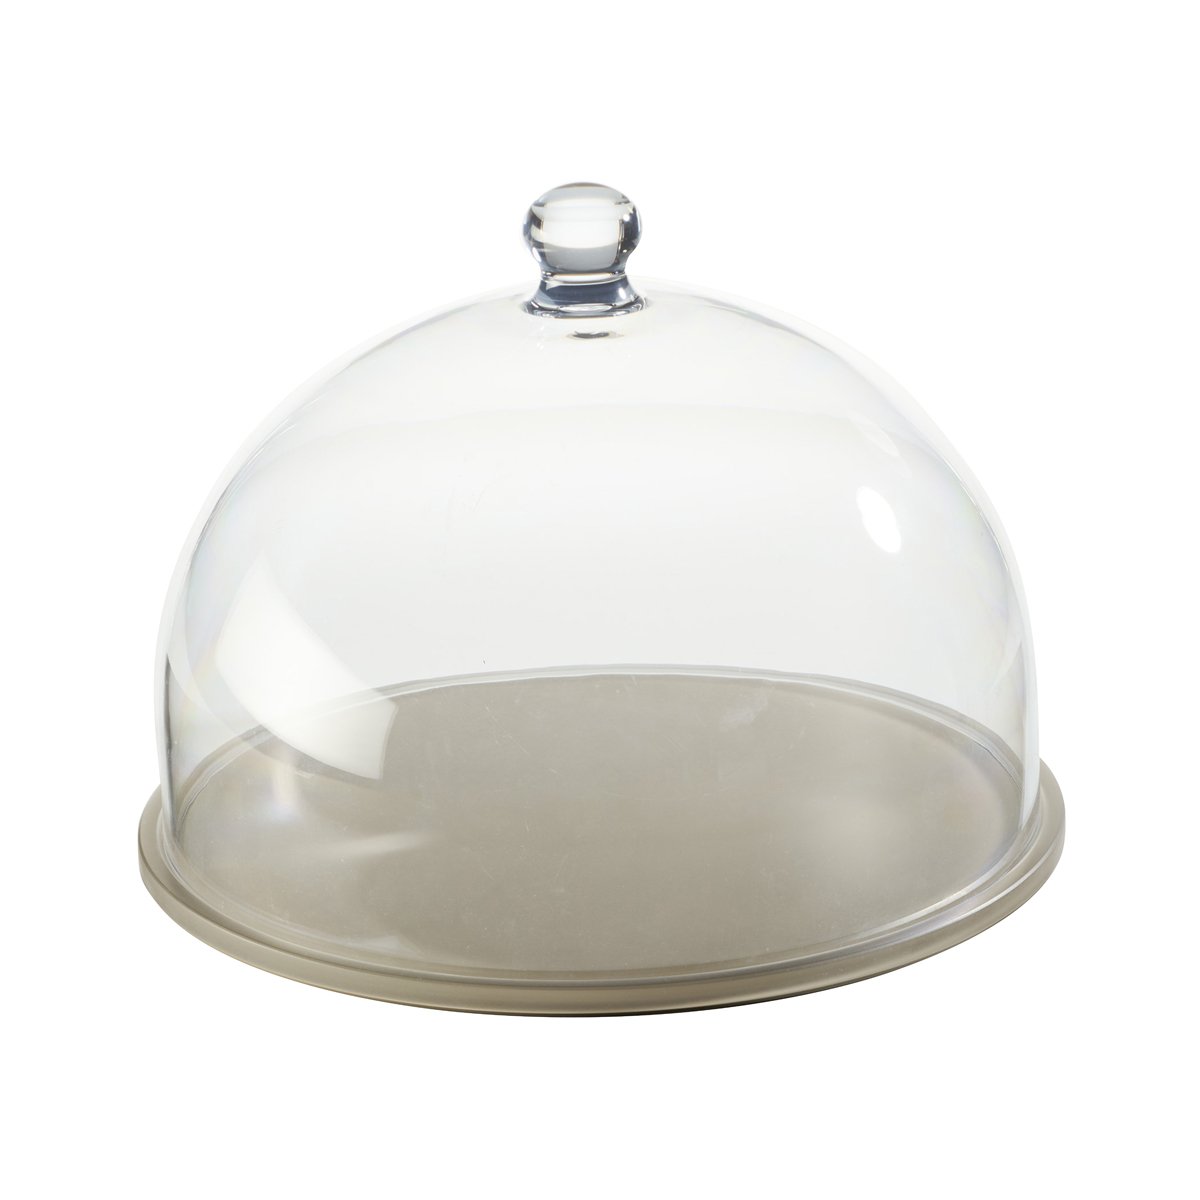 MLP116724 Mealplak Round Tray With Cloche Taupe 300x235mm Tomkin Australia Hospitality Supplies